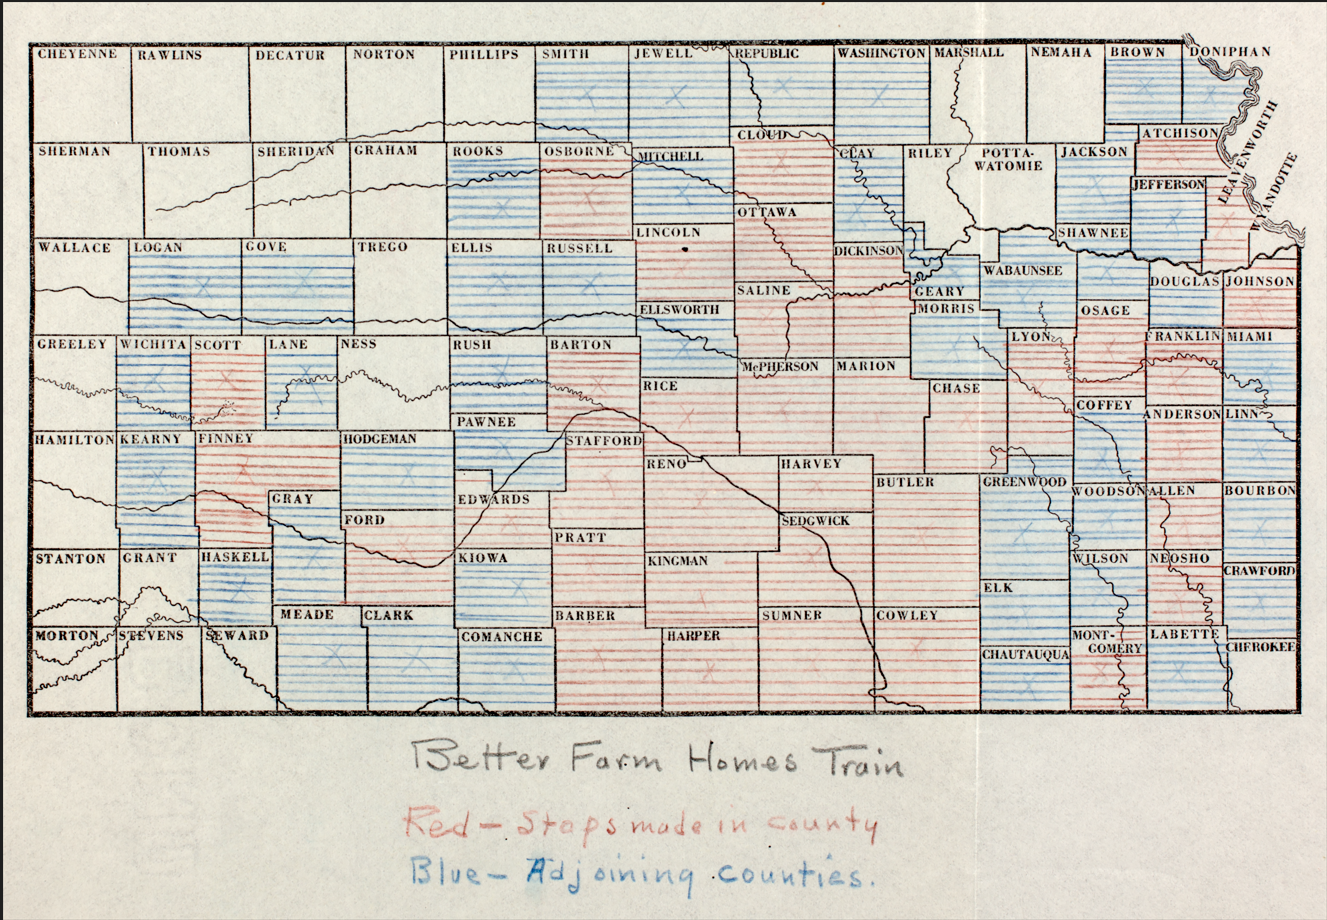 A map showing the route of the 1937 Better Farm Homes Demonstration Train across Kansas. The train stopped in counties hashed in red, and organizers believed the counties hashed in blue were close enough to benefit from the stops in neighboring counties. Courtesy Kansas Historical Society.